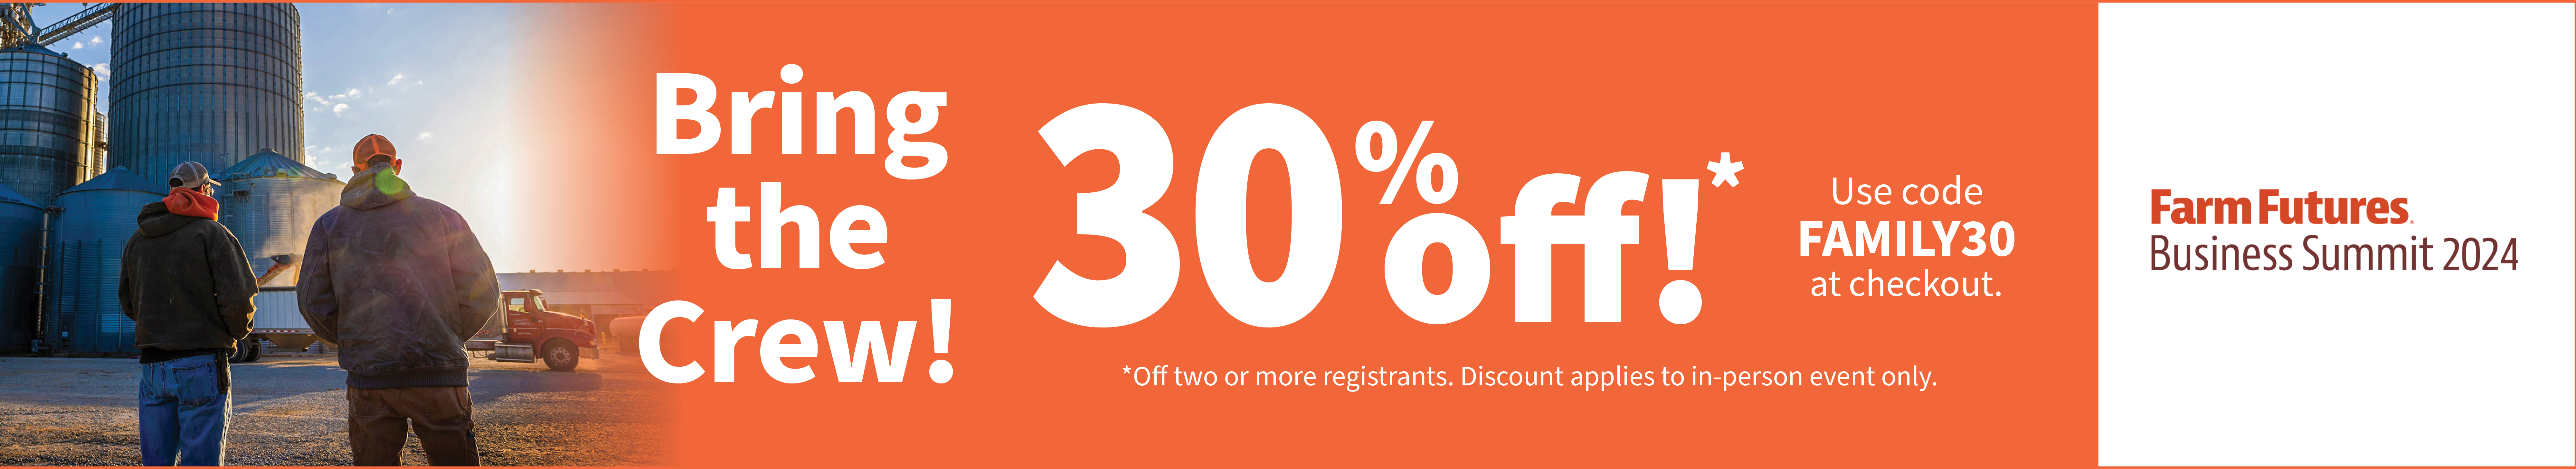 Save 30% when you register two or more individuals with code FAMILY30.